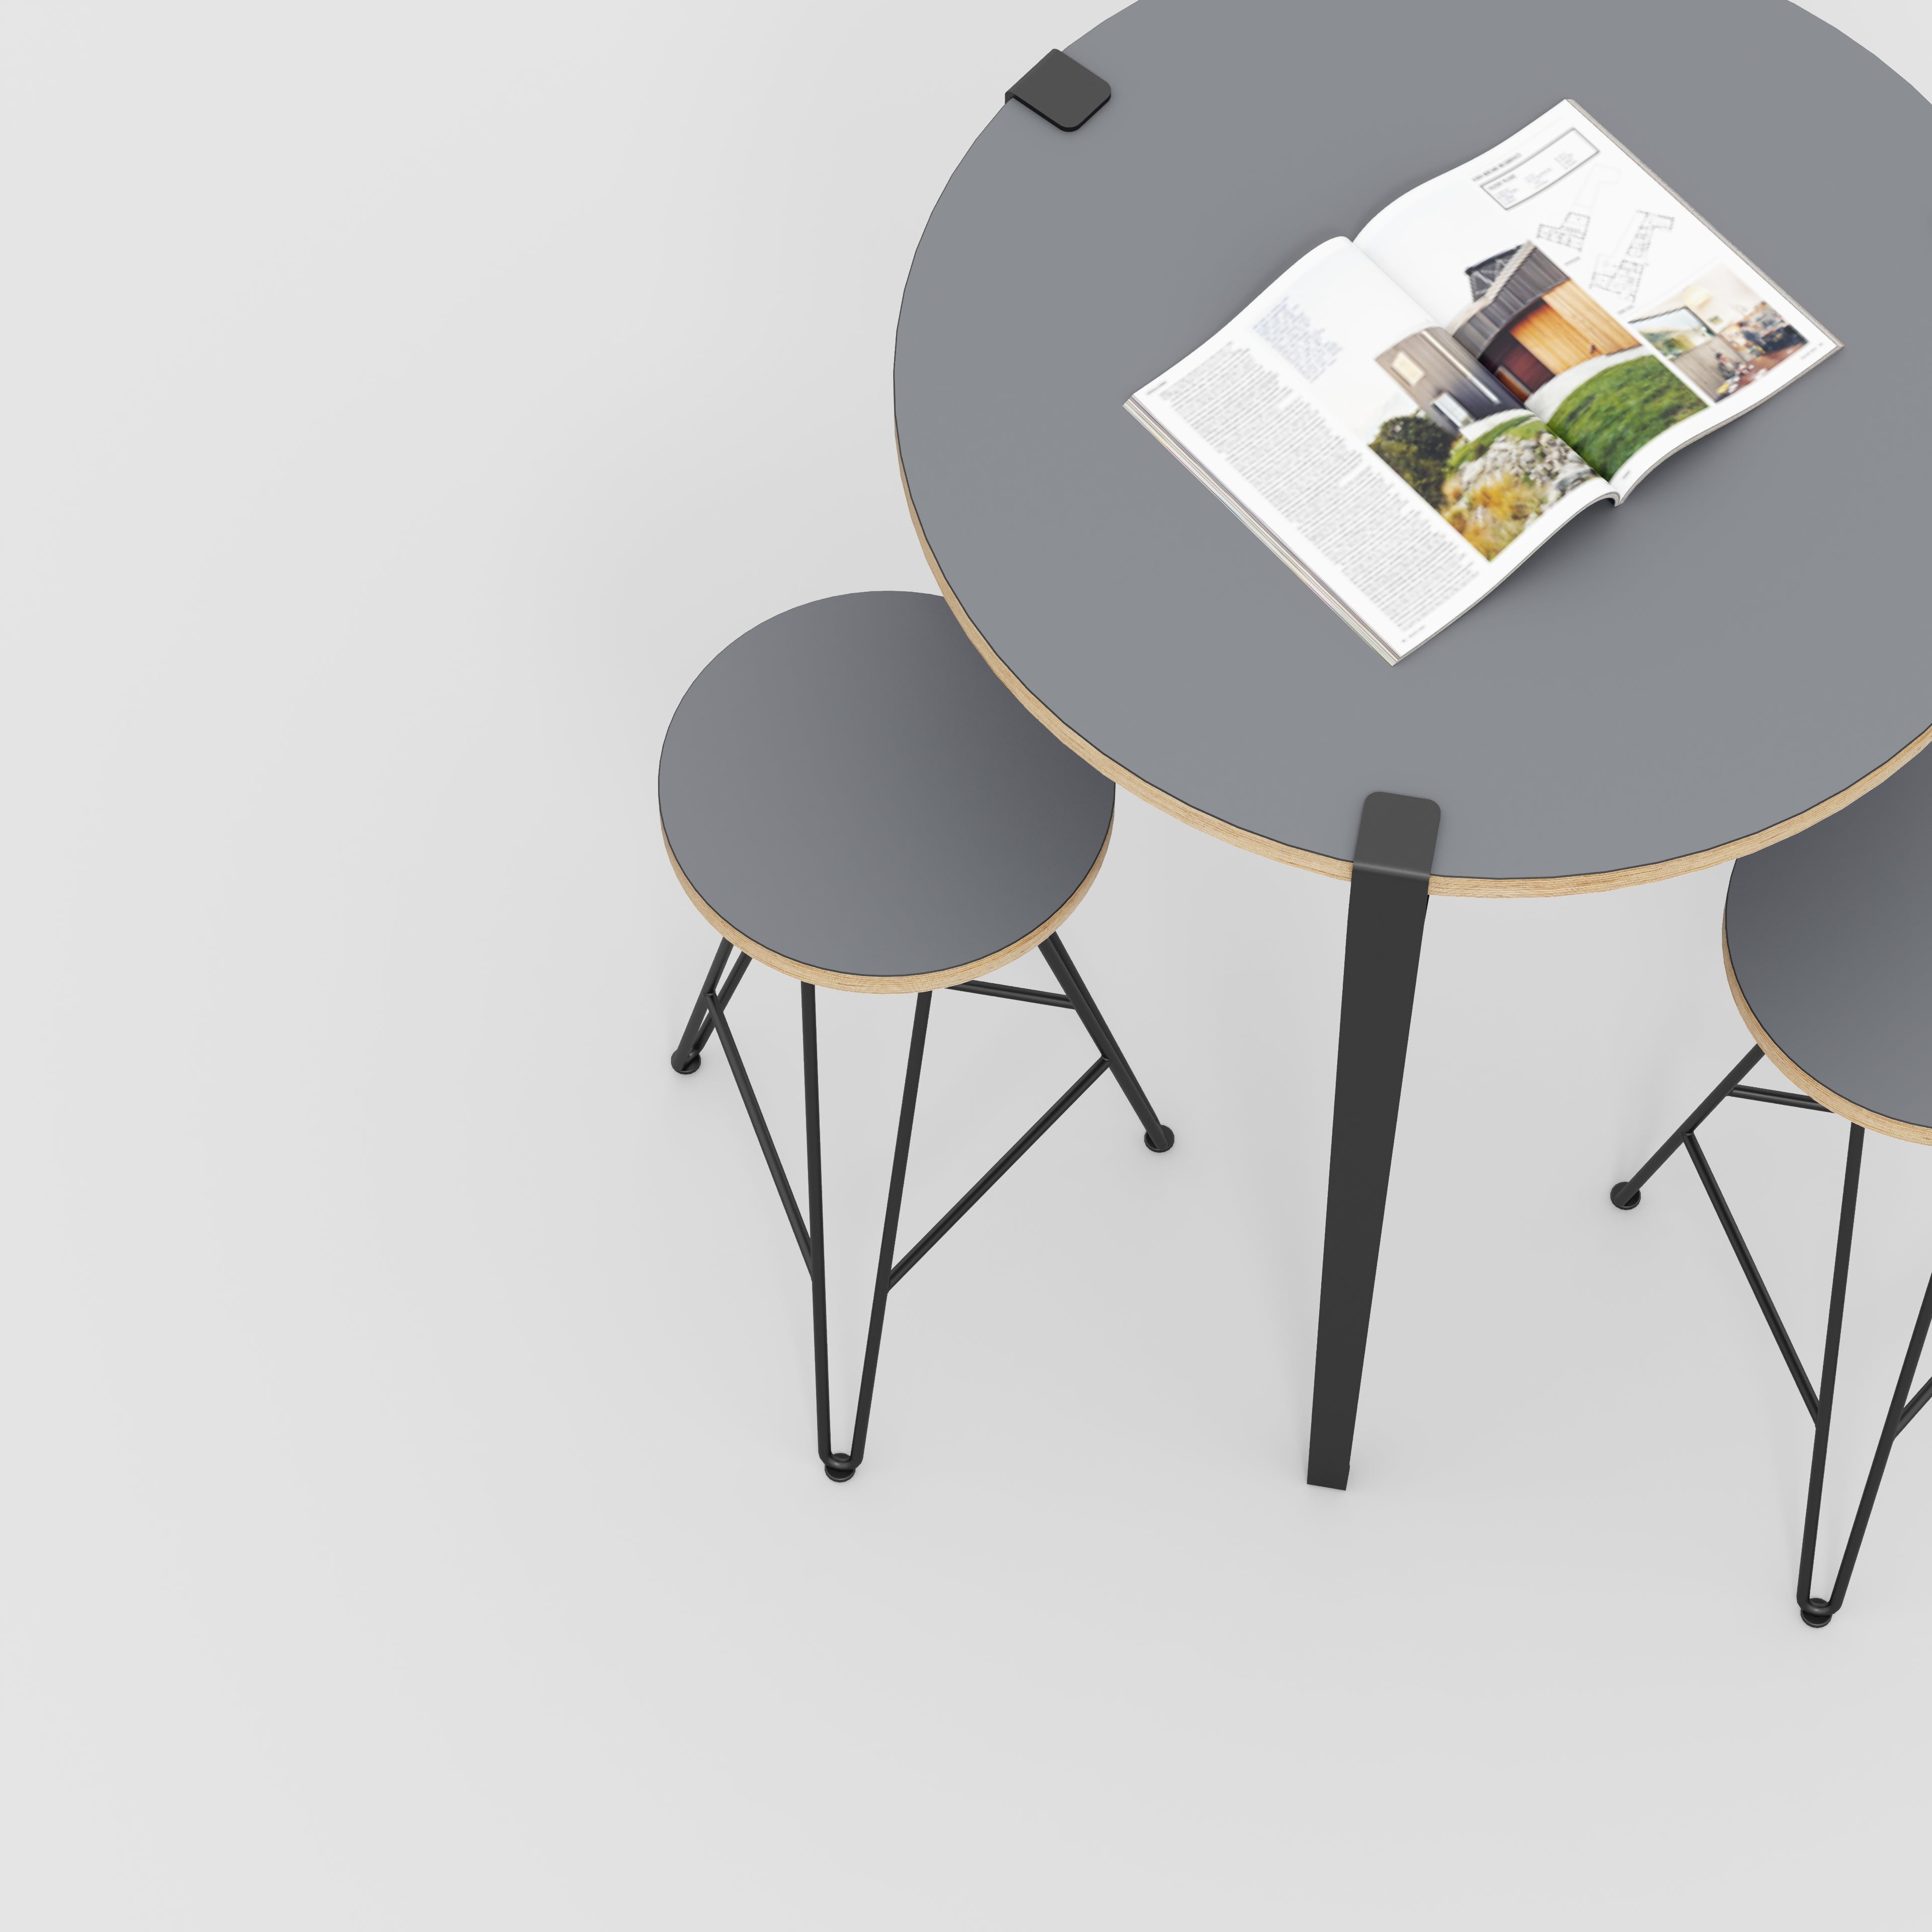 Round Table with Black Tiptoe Legs - Formica Tornado Grey - 800(dia) x 900(h)